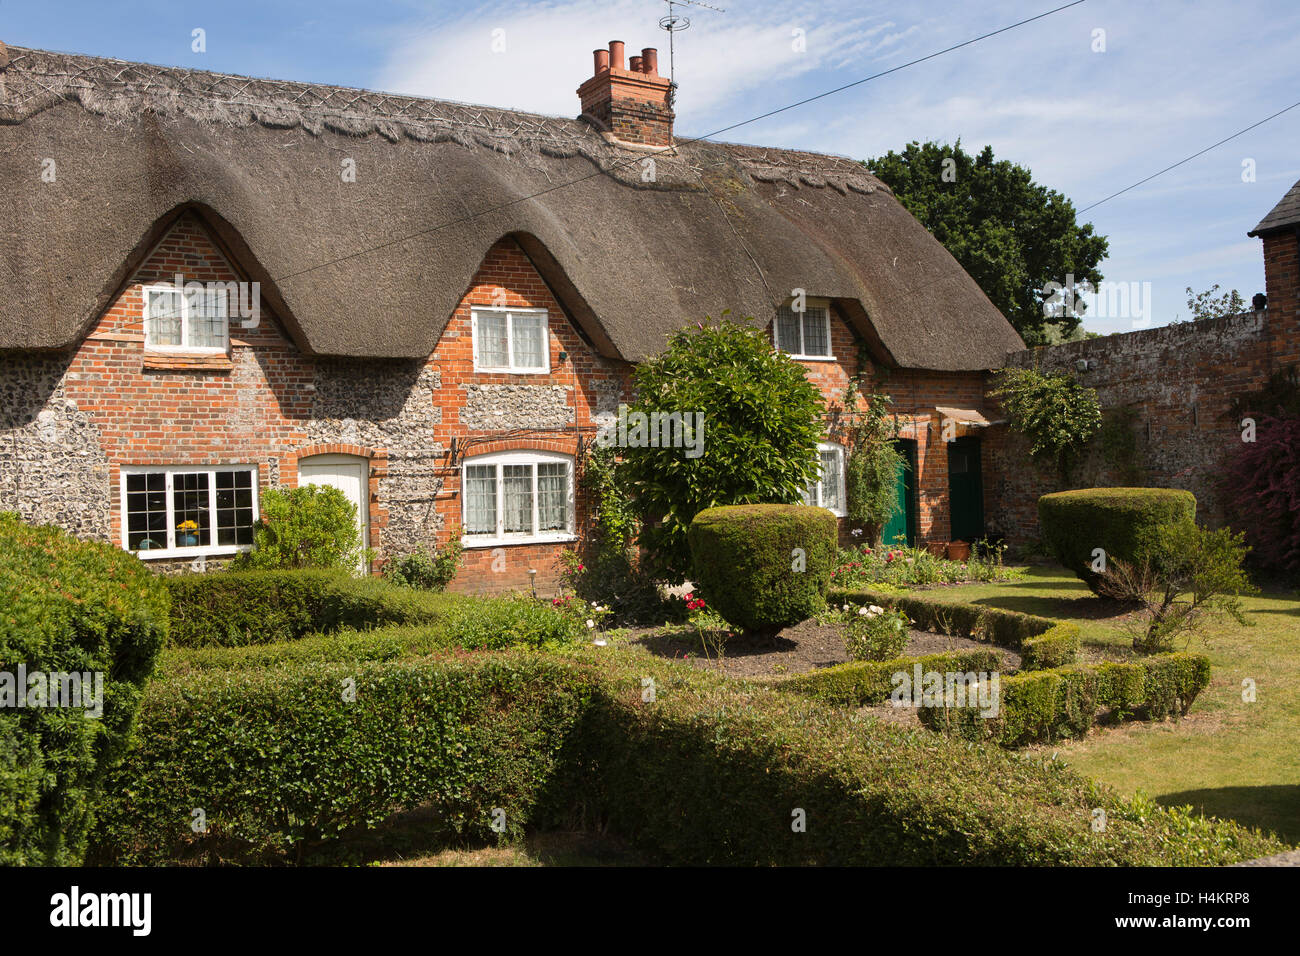 England, Wiltshire, Chilton Foliat, thatched brick and flint cottages Stock Photo